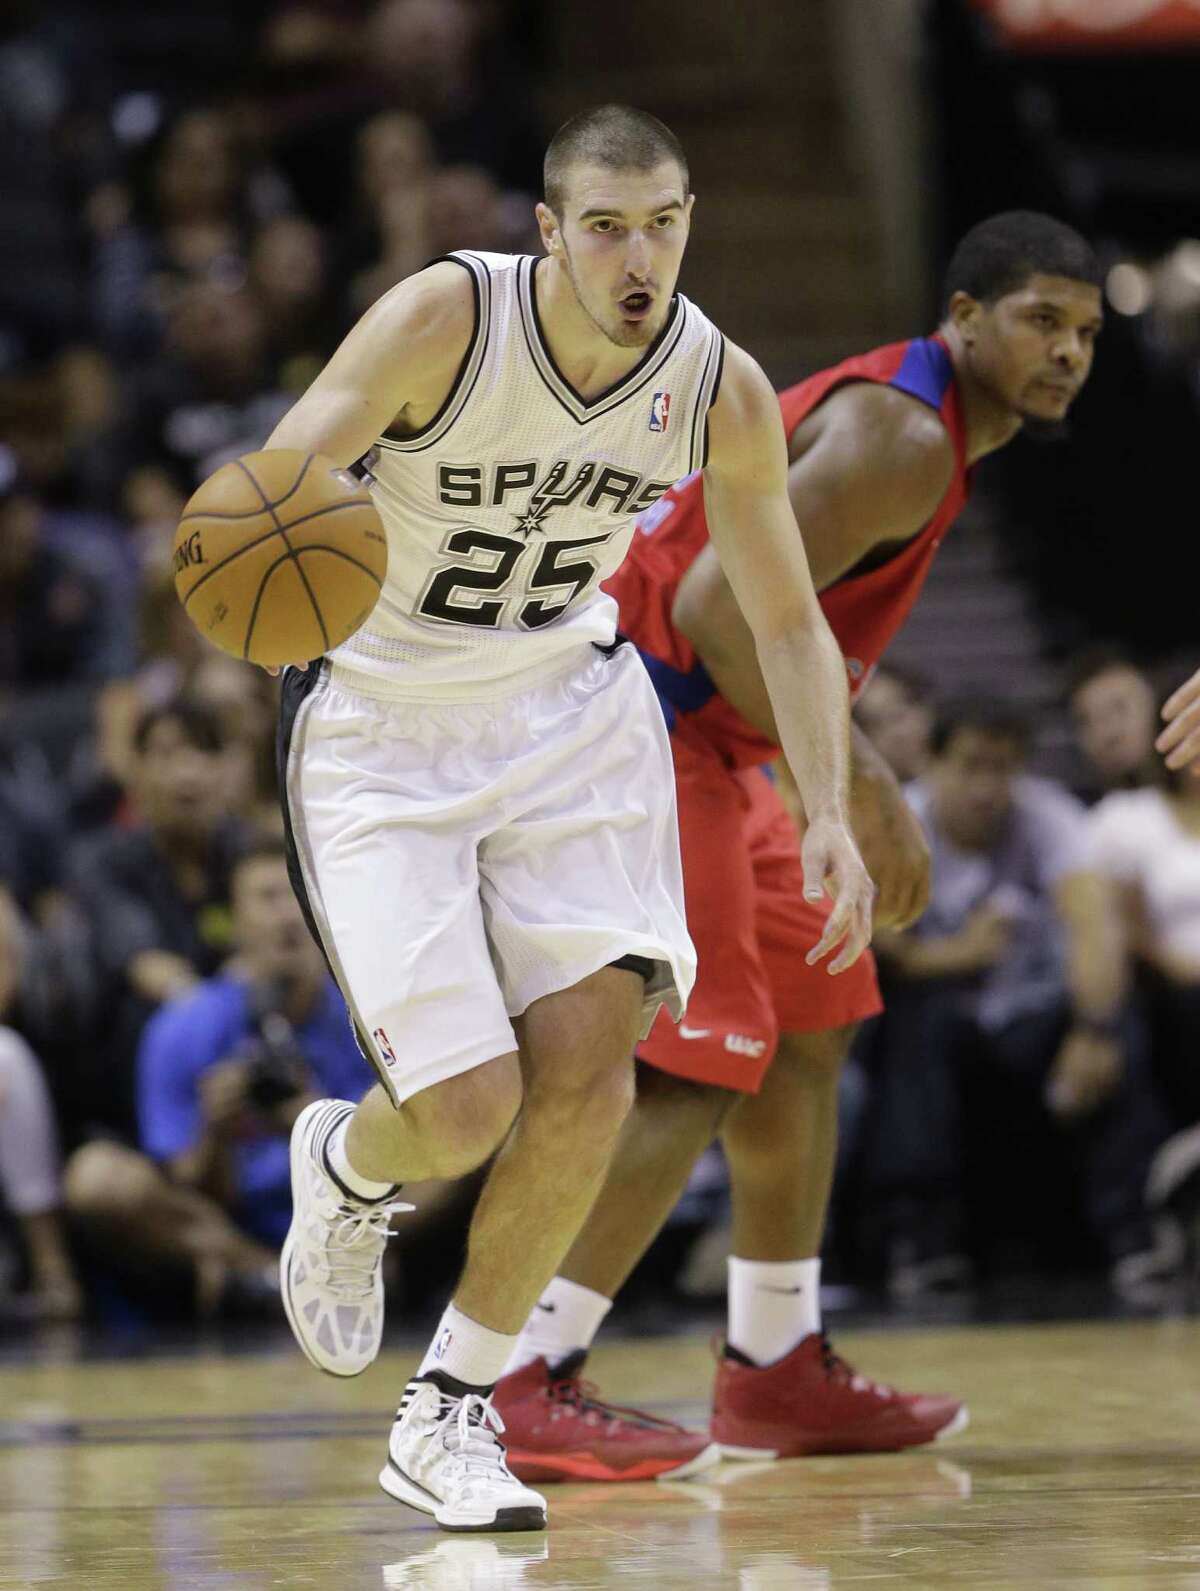 Point guard Nando De Colo is averaging 15.4 minutes in the preseason games as the Spurs try to build his confidence.